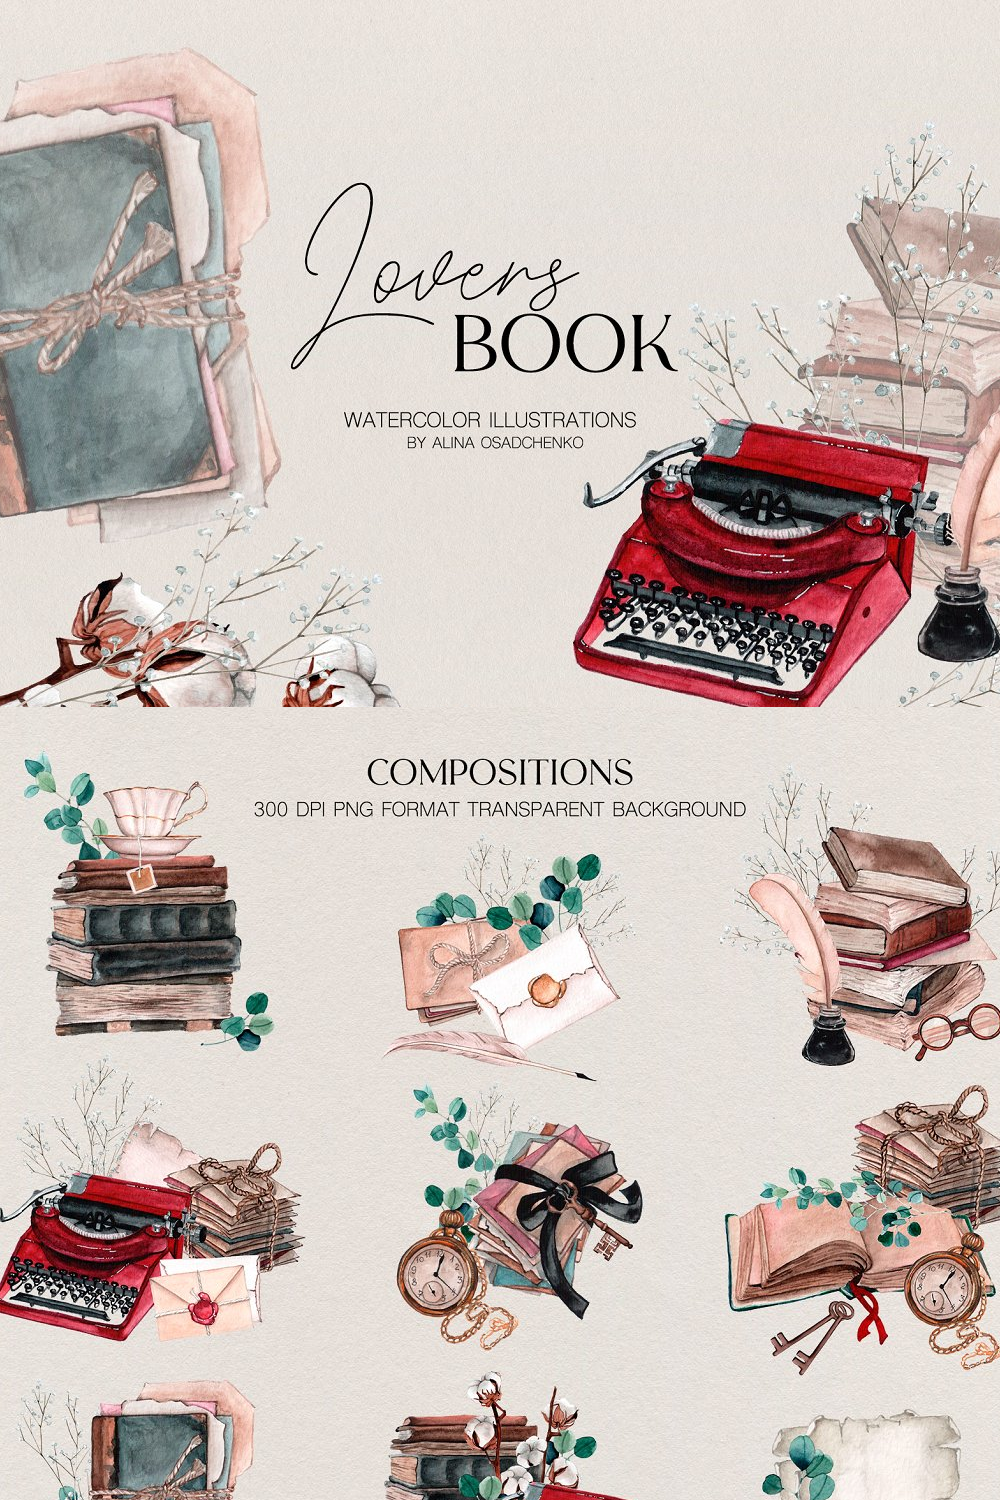 Illustrations book lovers watercolor set of pinterest.